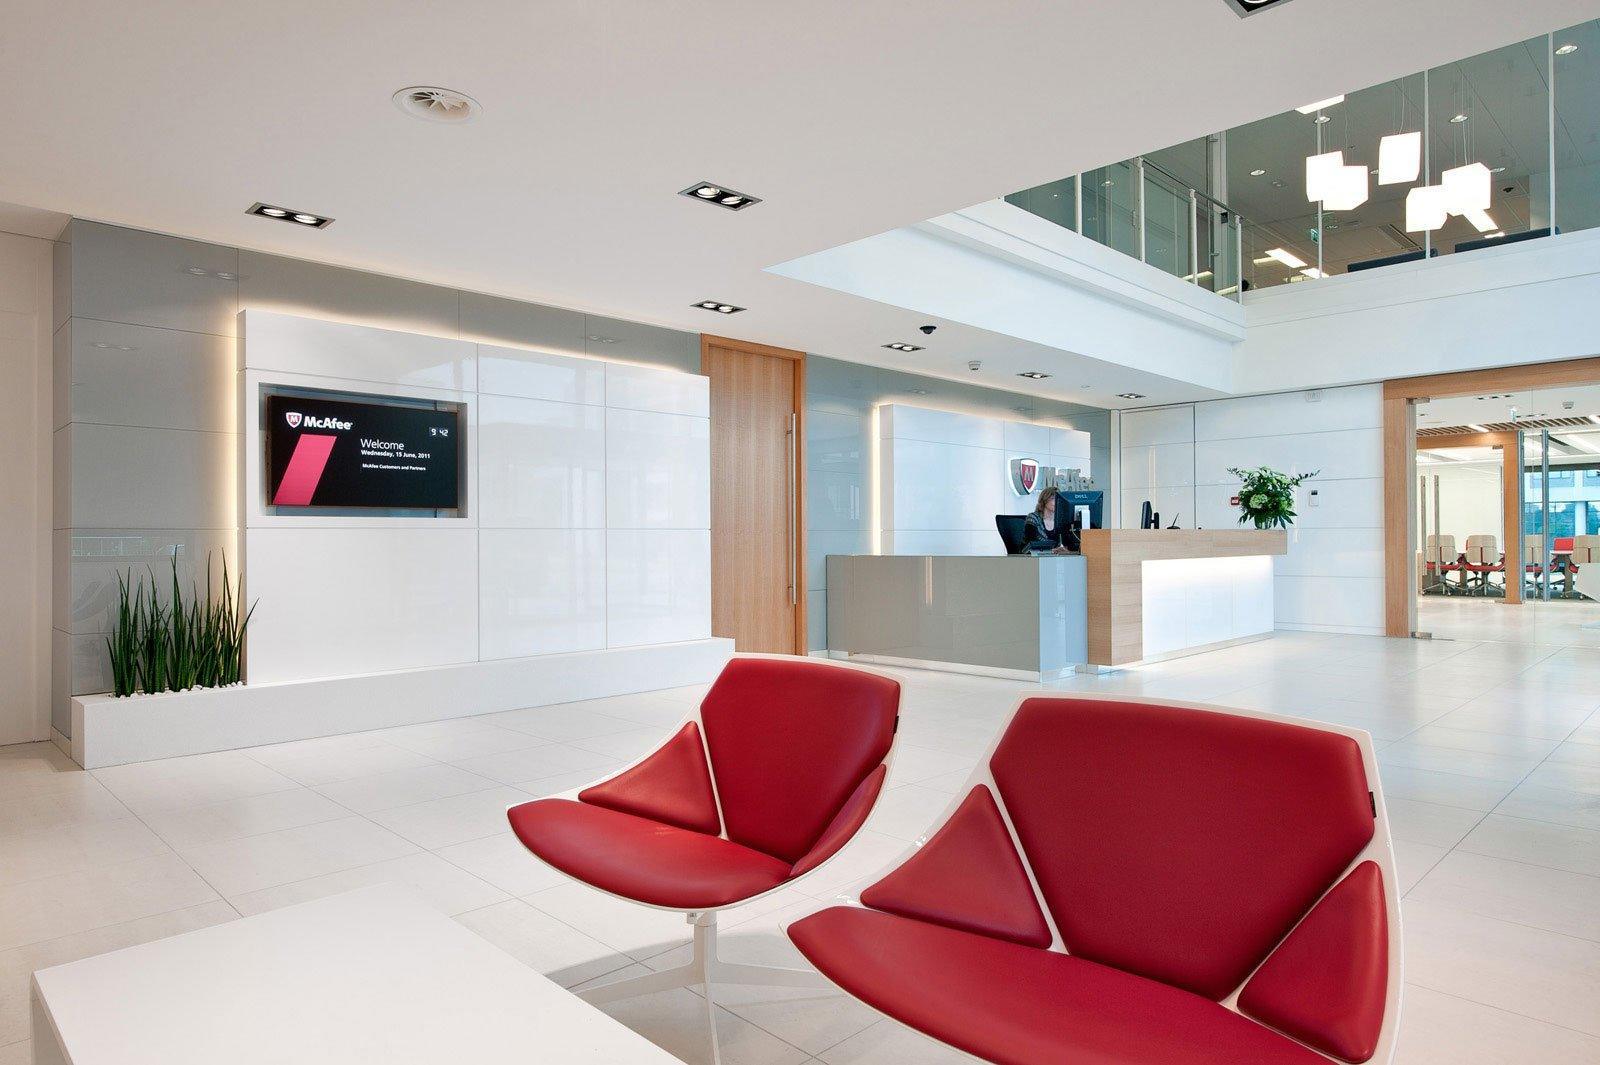 Check Out Photos of McAfee’s Elegant Amsterdam Office